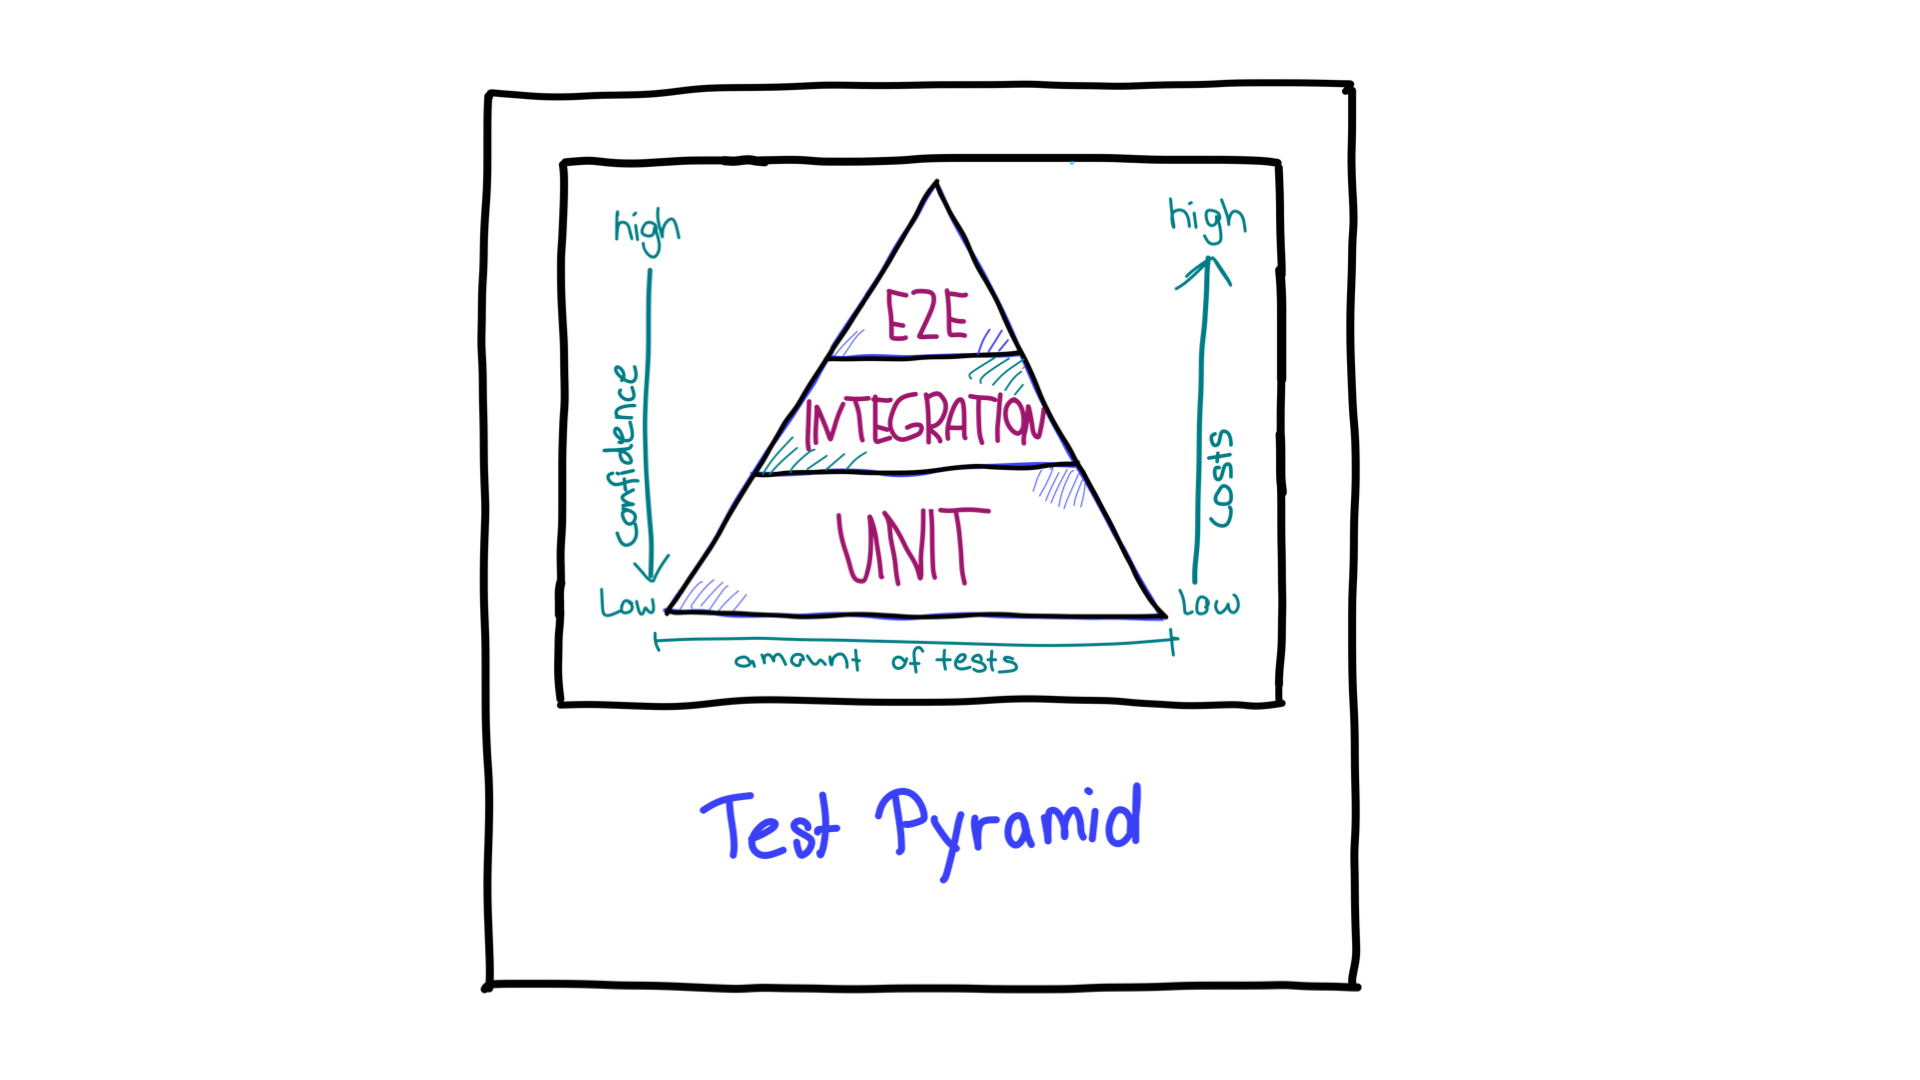 The test pyramid with arrows showing the direction of confidence and resources required for different testing types.